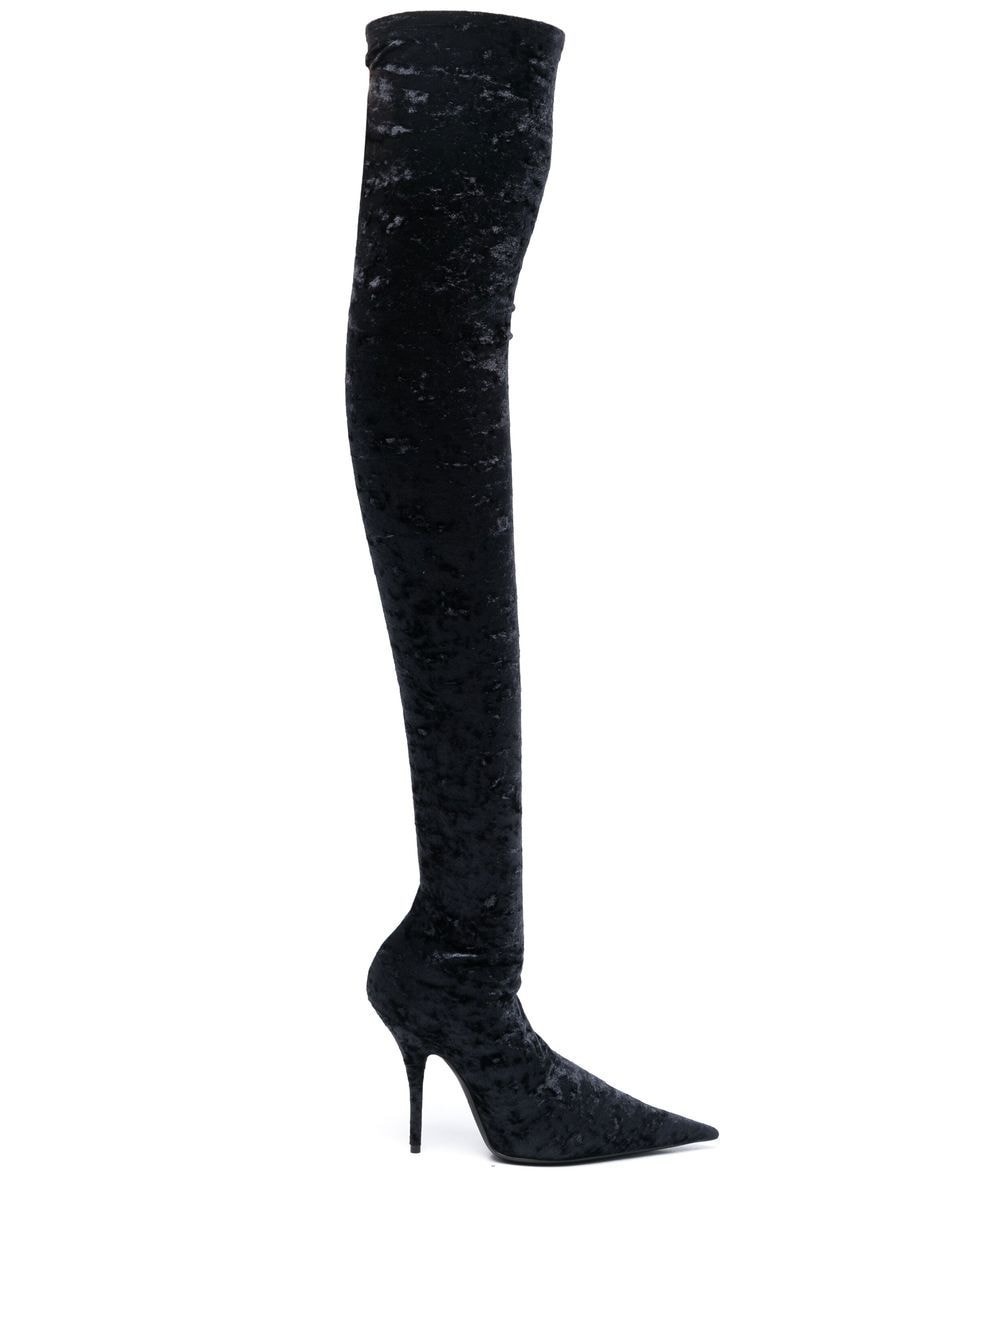 Knife thigh-high crushed velvet boots - 1